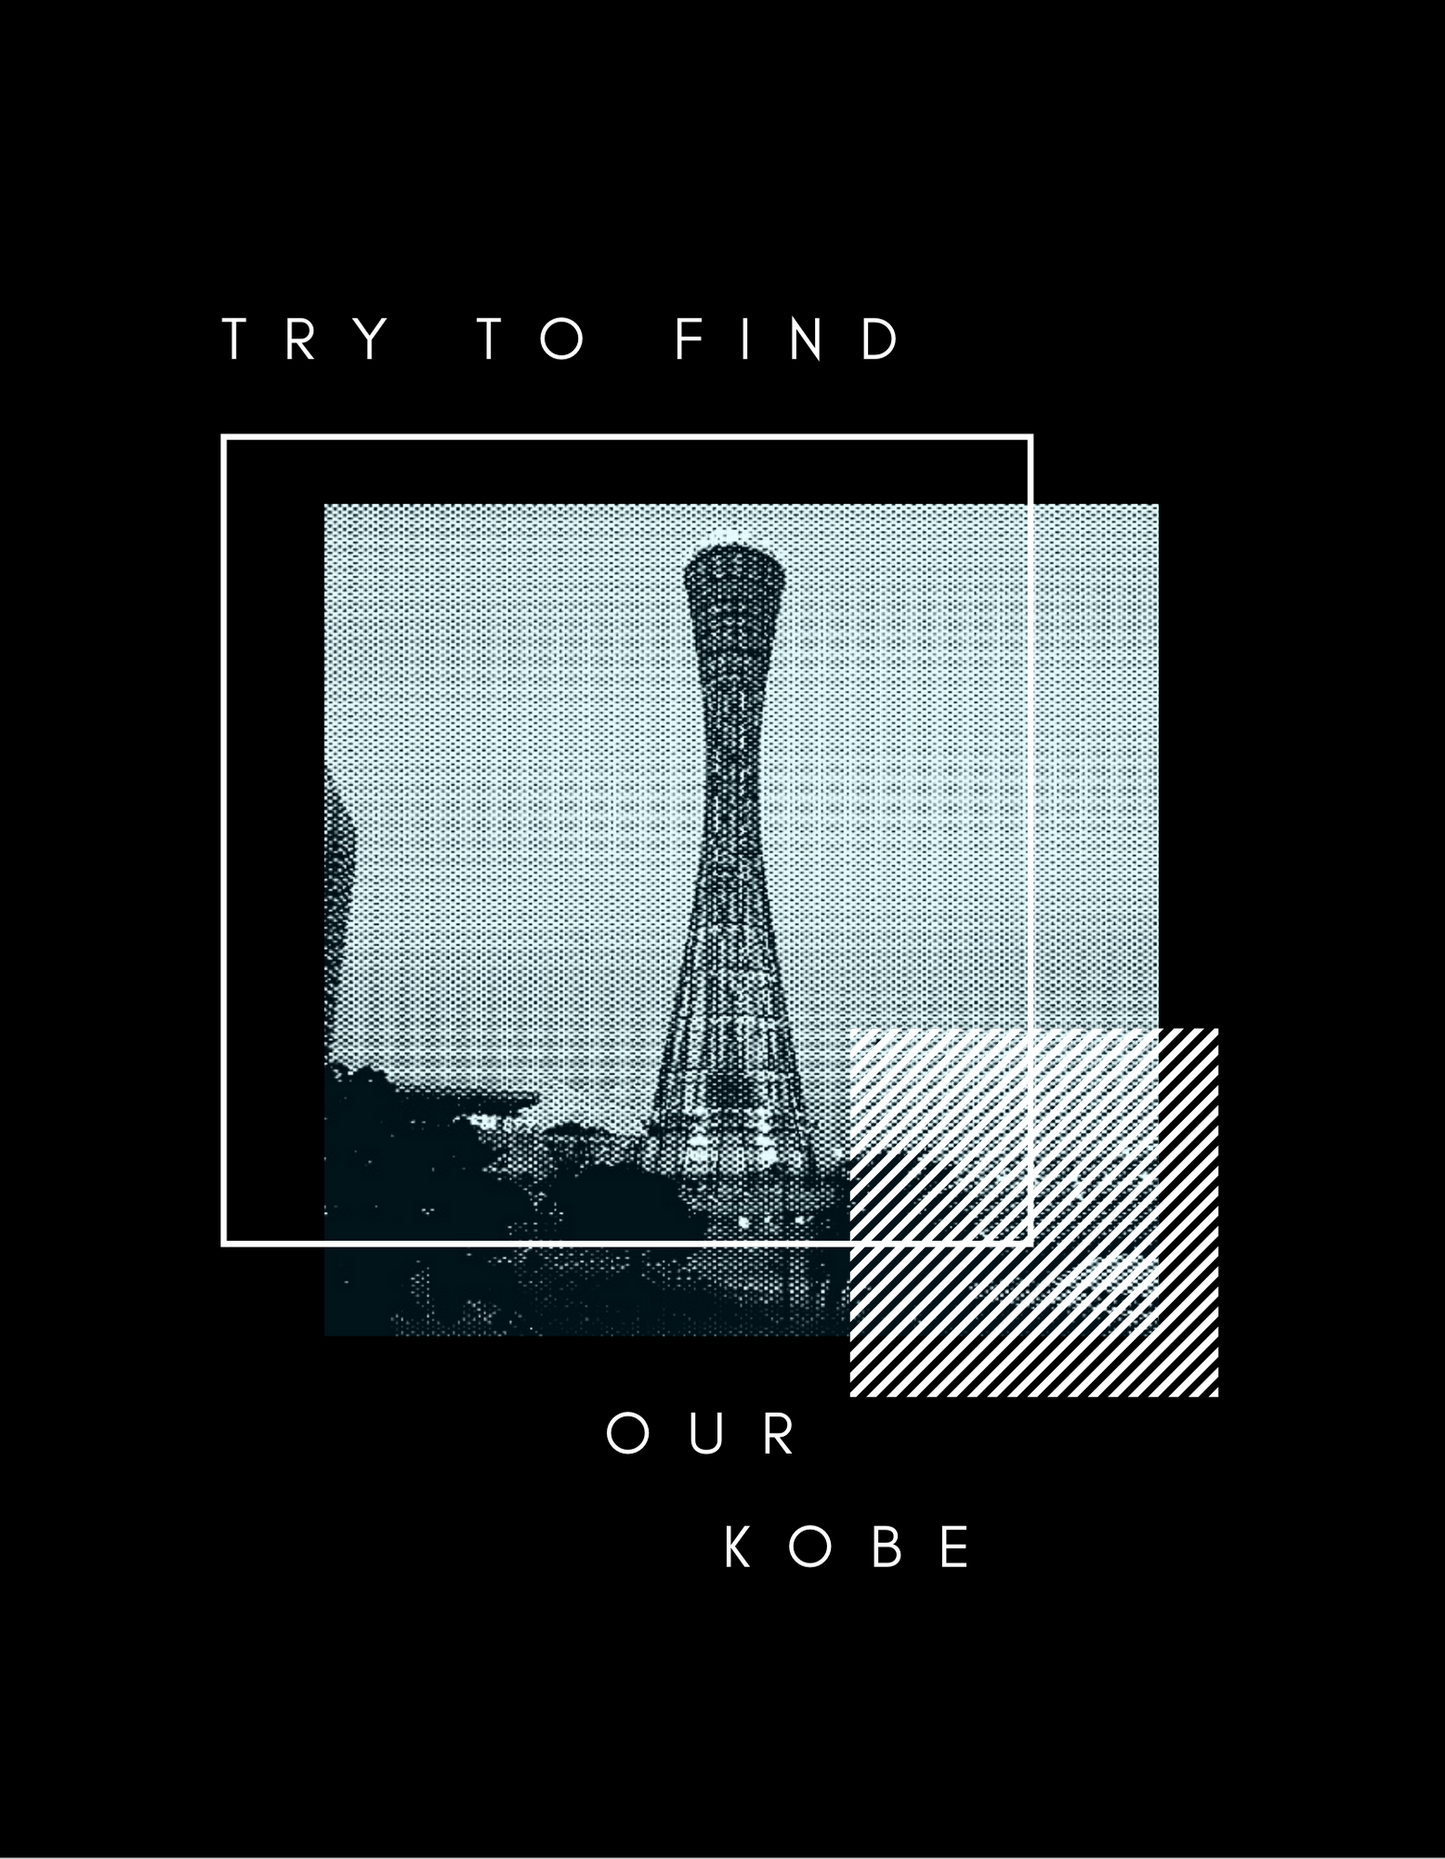 Try to find our Kobe Kobe Port Tower